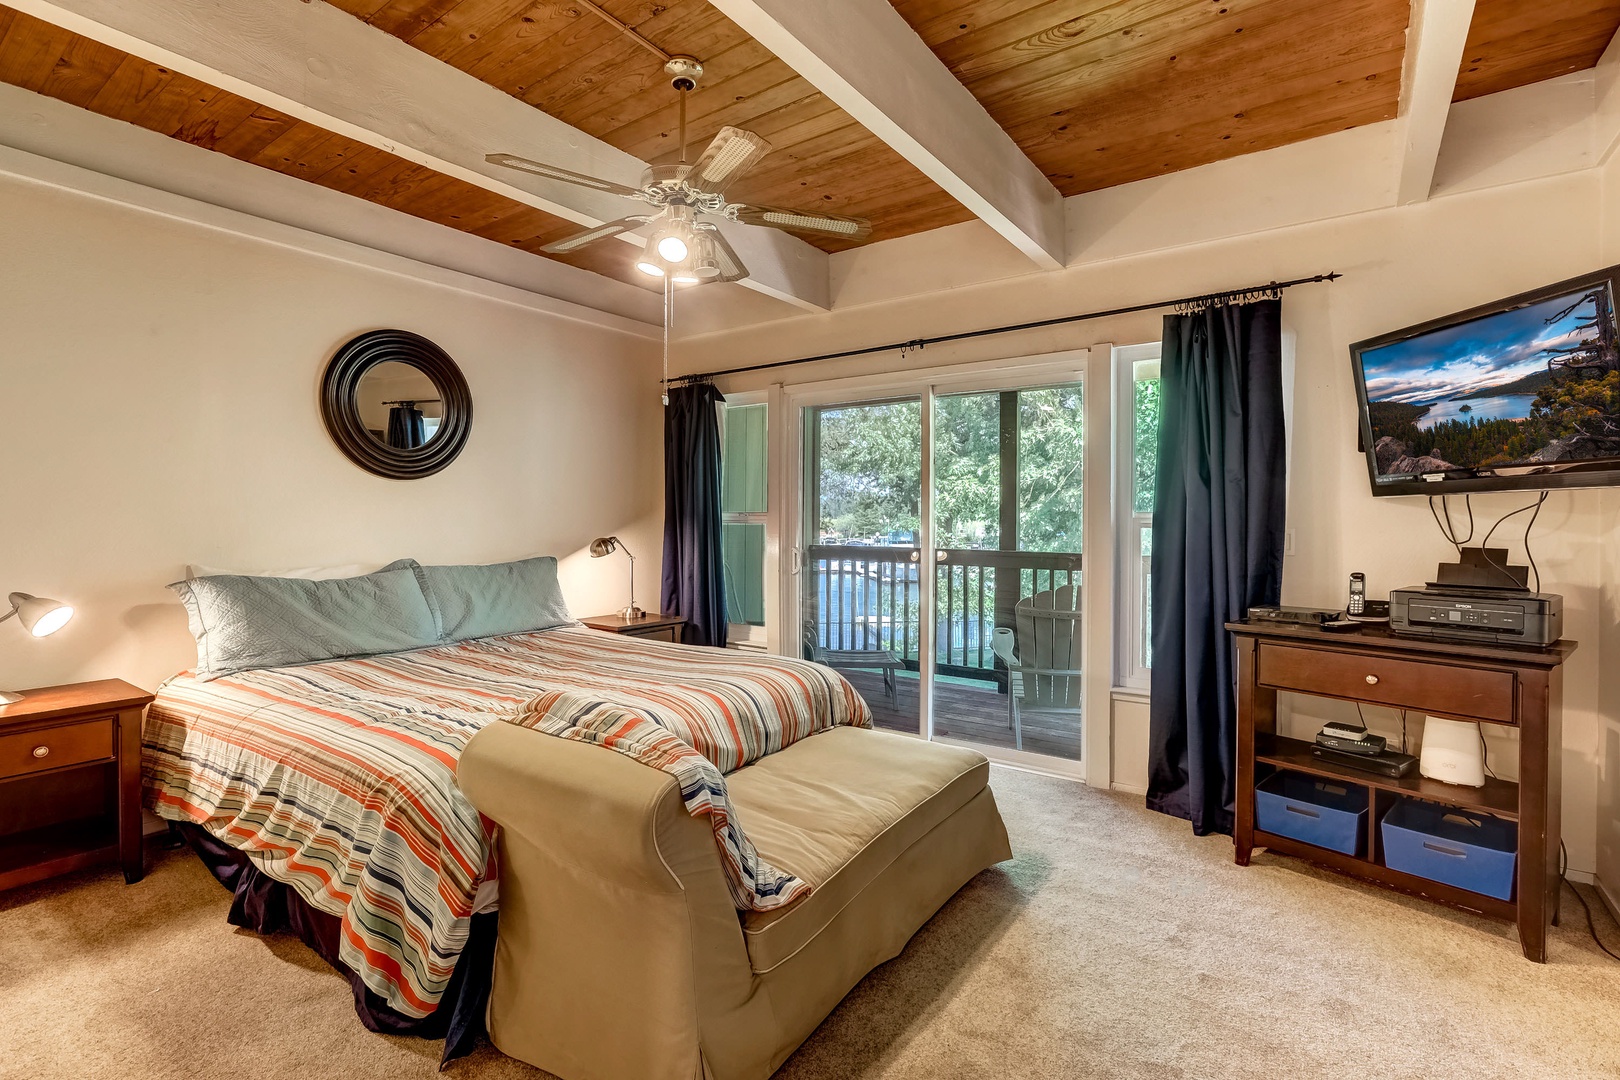 Master bedroom: King bed, cable TV, DVC player, private balcony (upstairs)